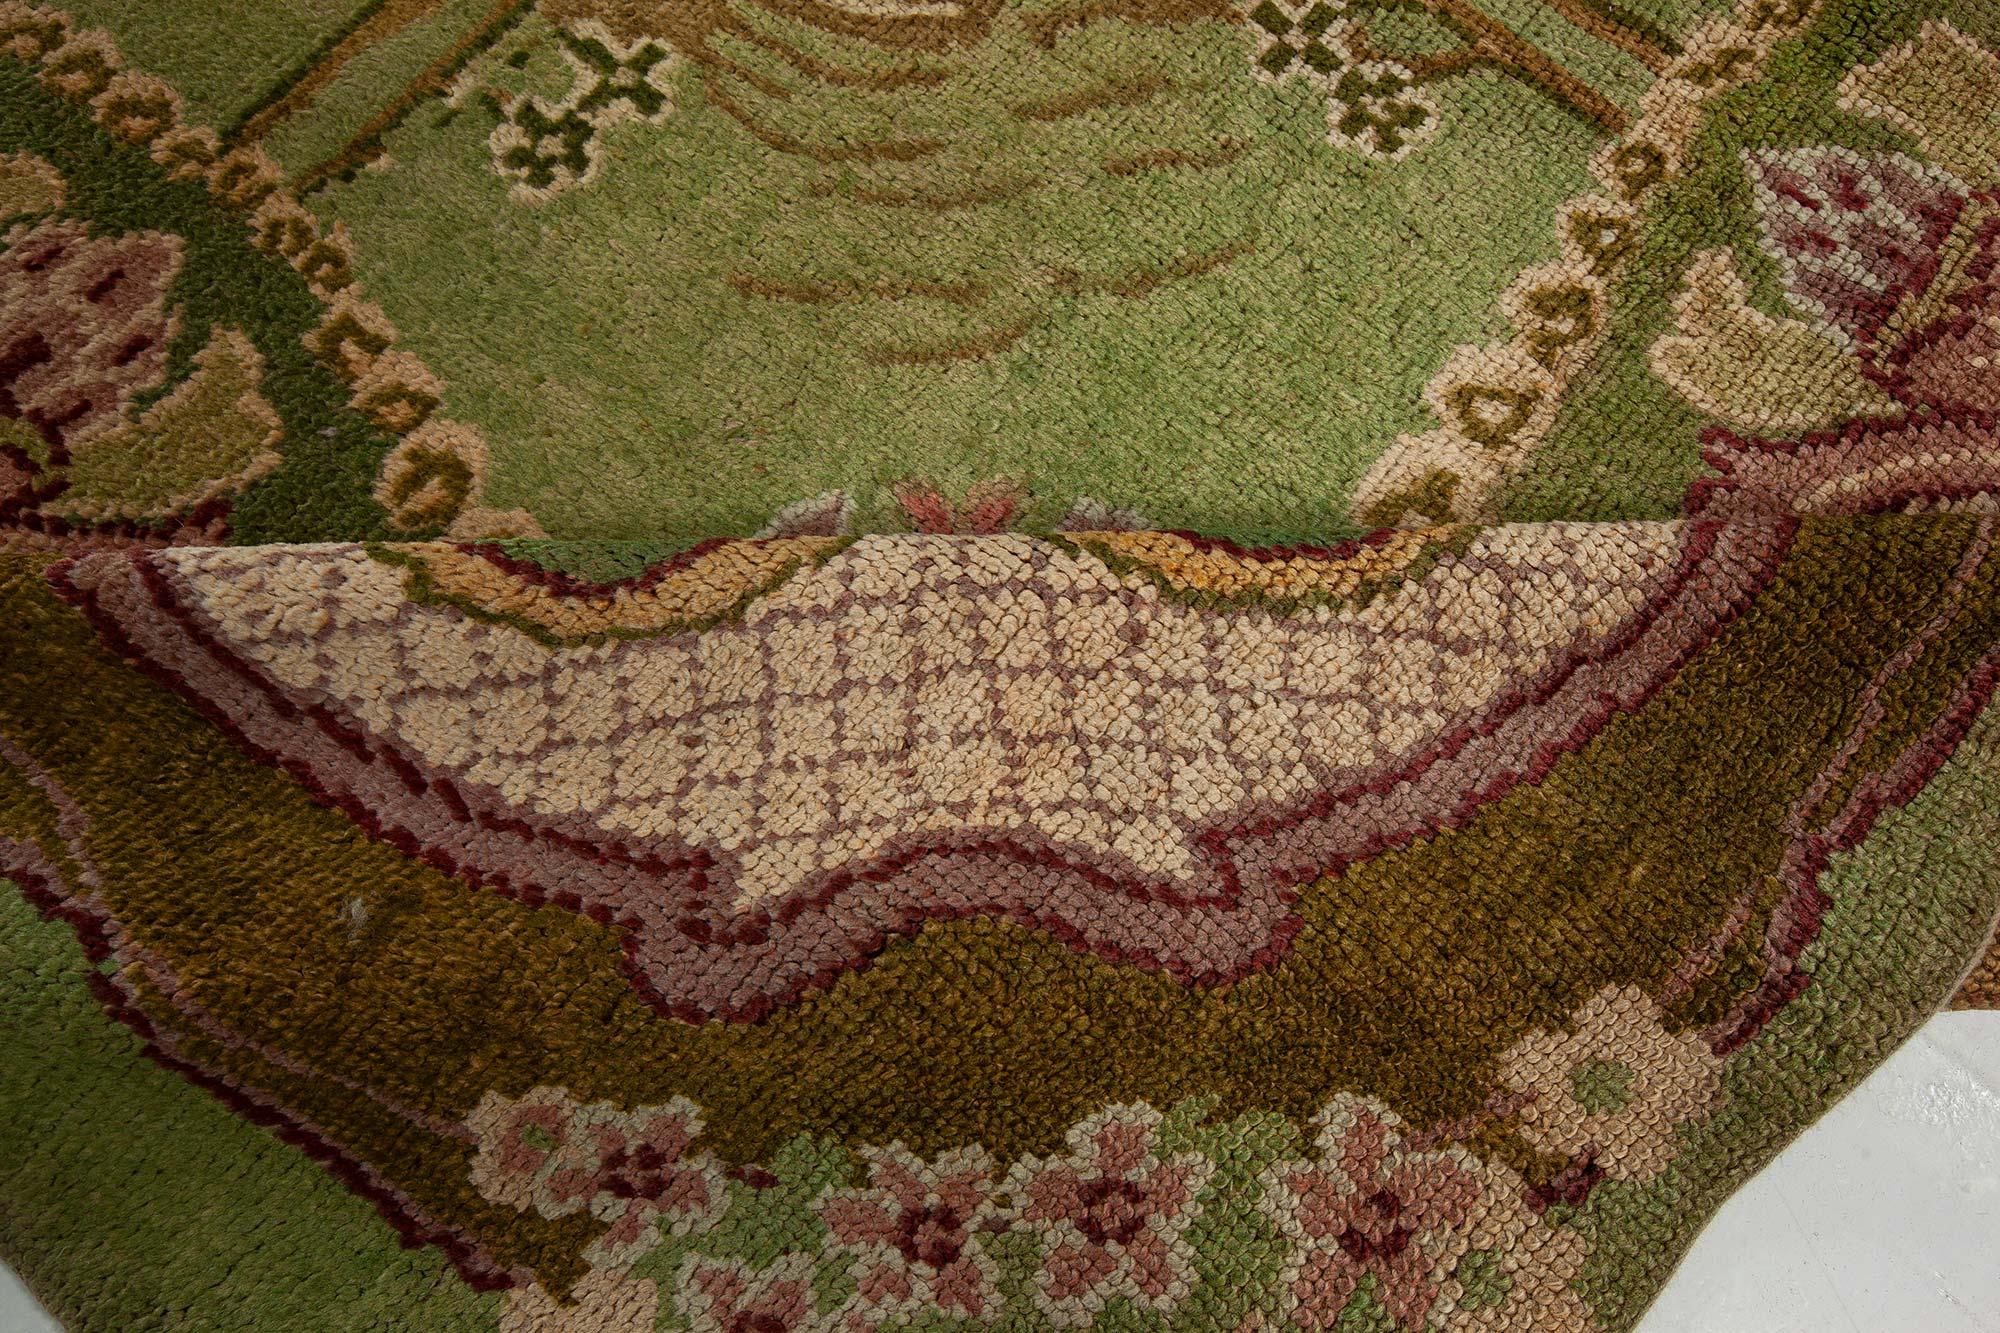 1900s Arts & Crafts wool rug by C.F.A. Voysey
Size: 12'2